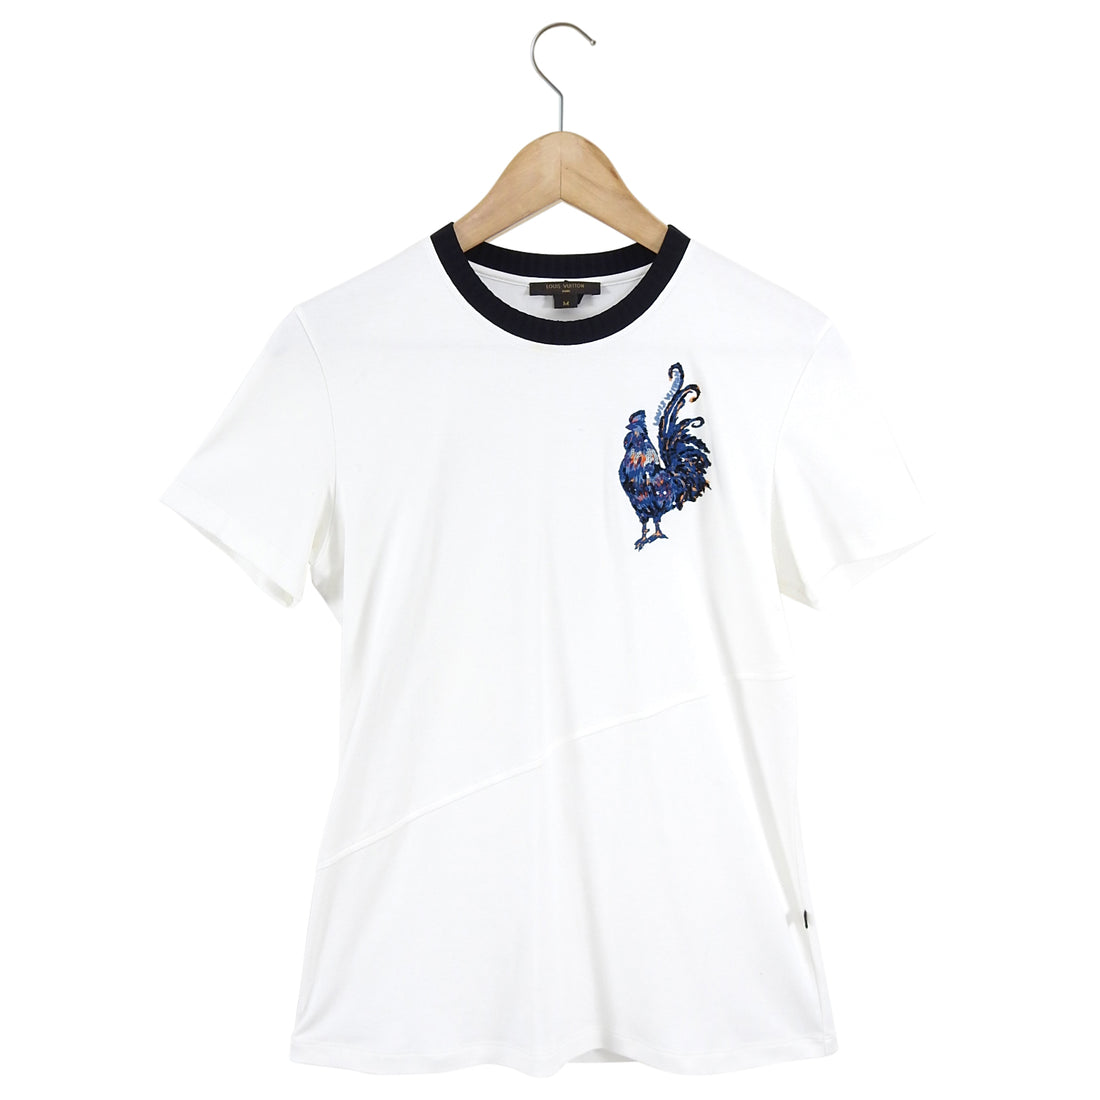 Louis Vuitton White Sequin Rooster Embellished T Shirt - M / 6